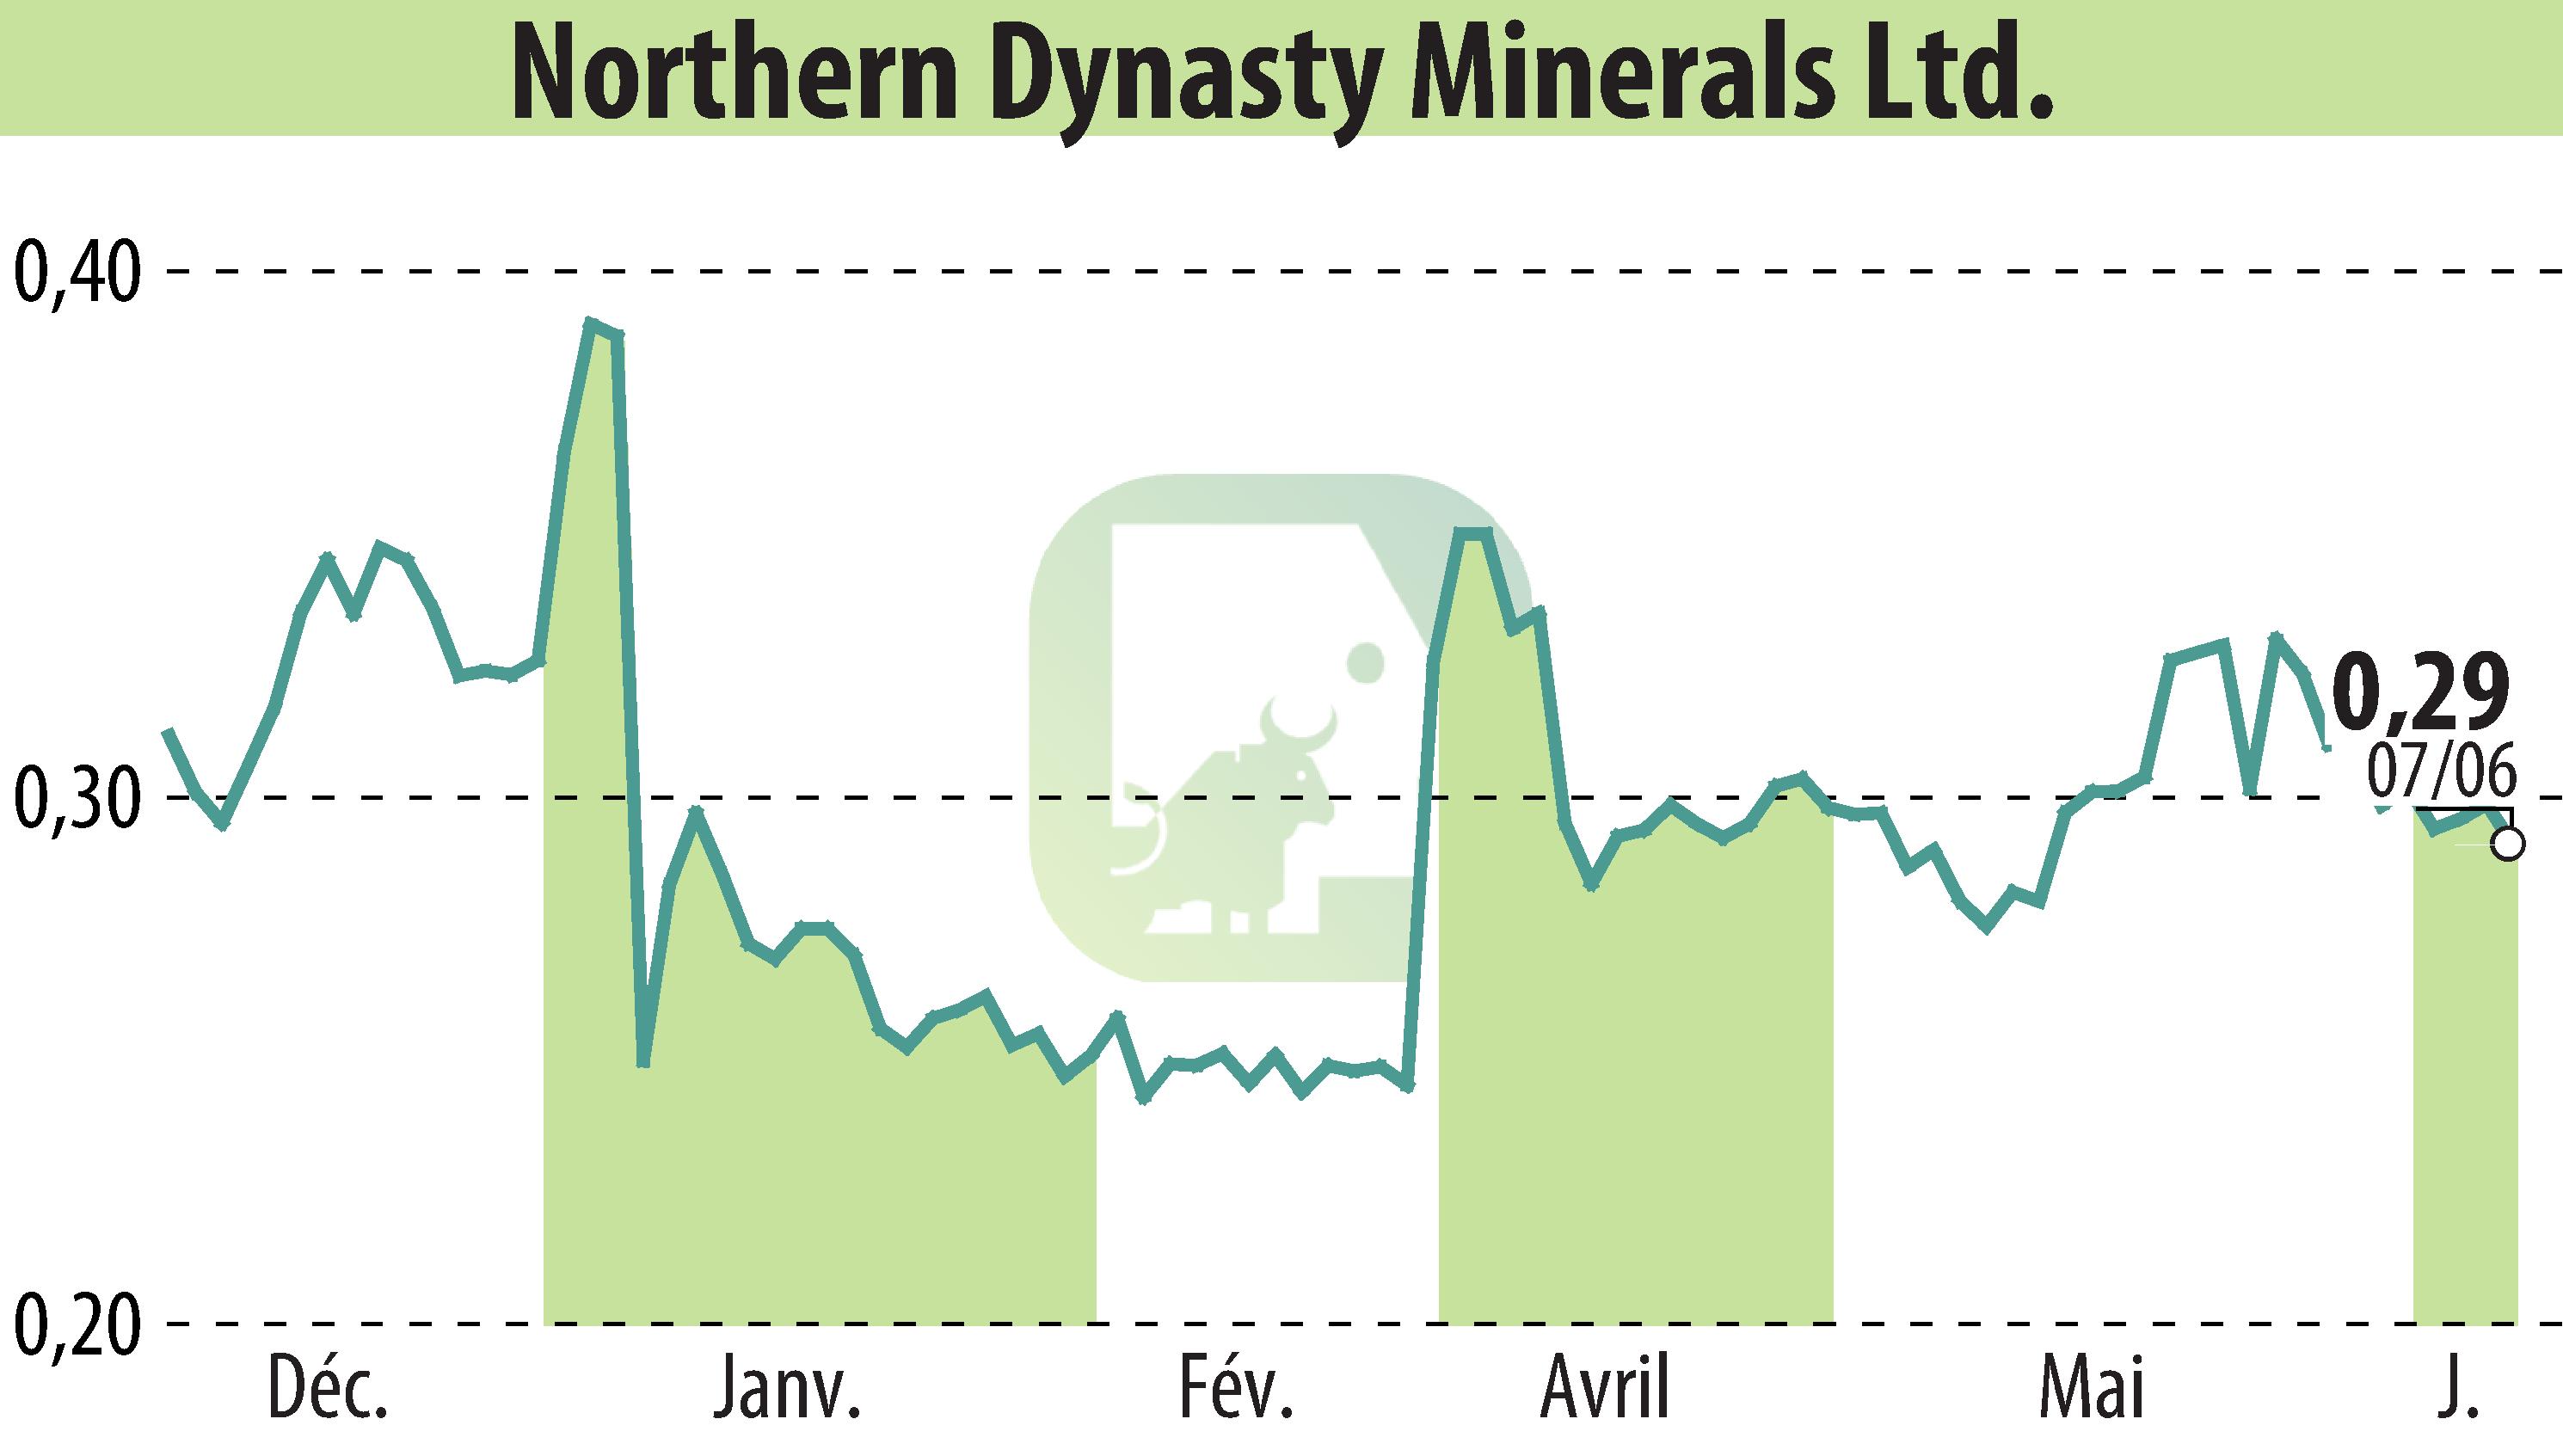 Stock price chart of Northern Dynasty Minerals Ltd. (EBR:NAK) showing fluctuations.